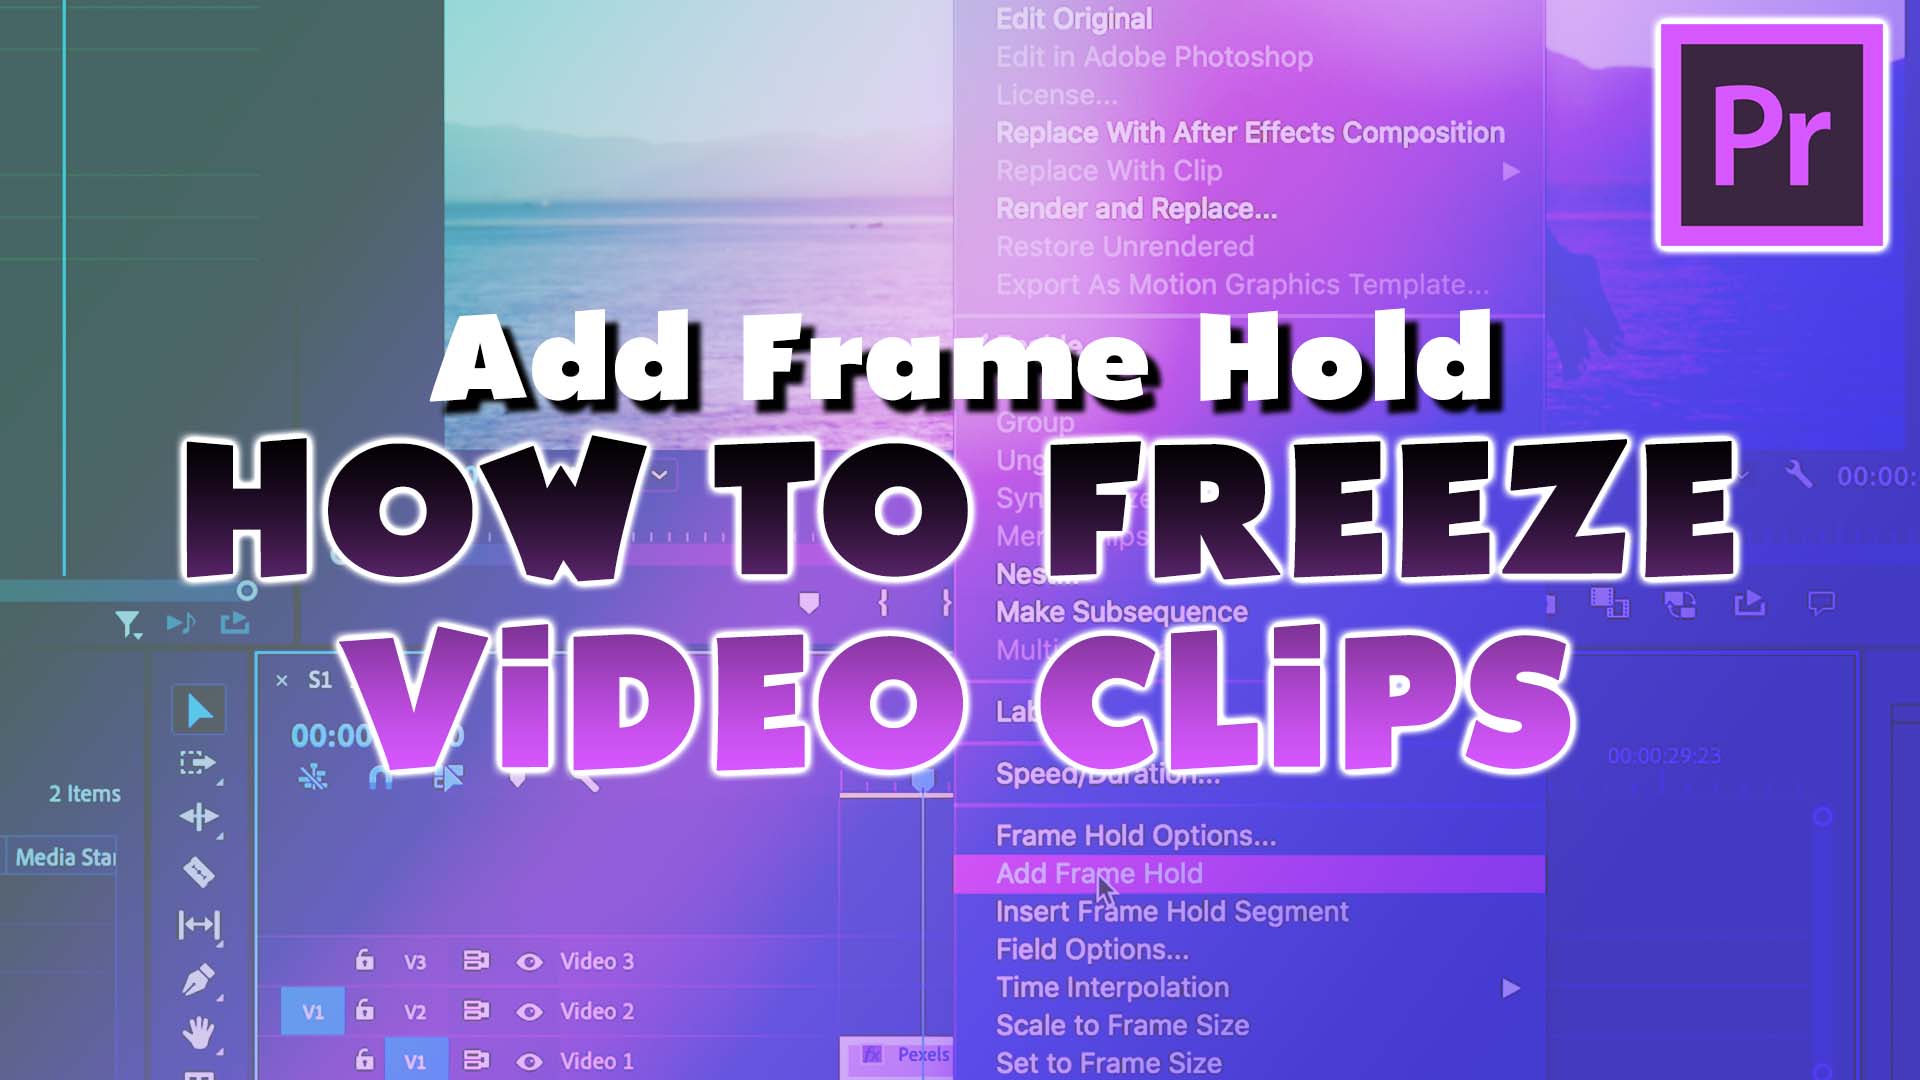 How to Freeze Frame / Freeze Video | Add Frame Hold (Premiere Pro Tutorial)